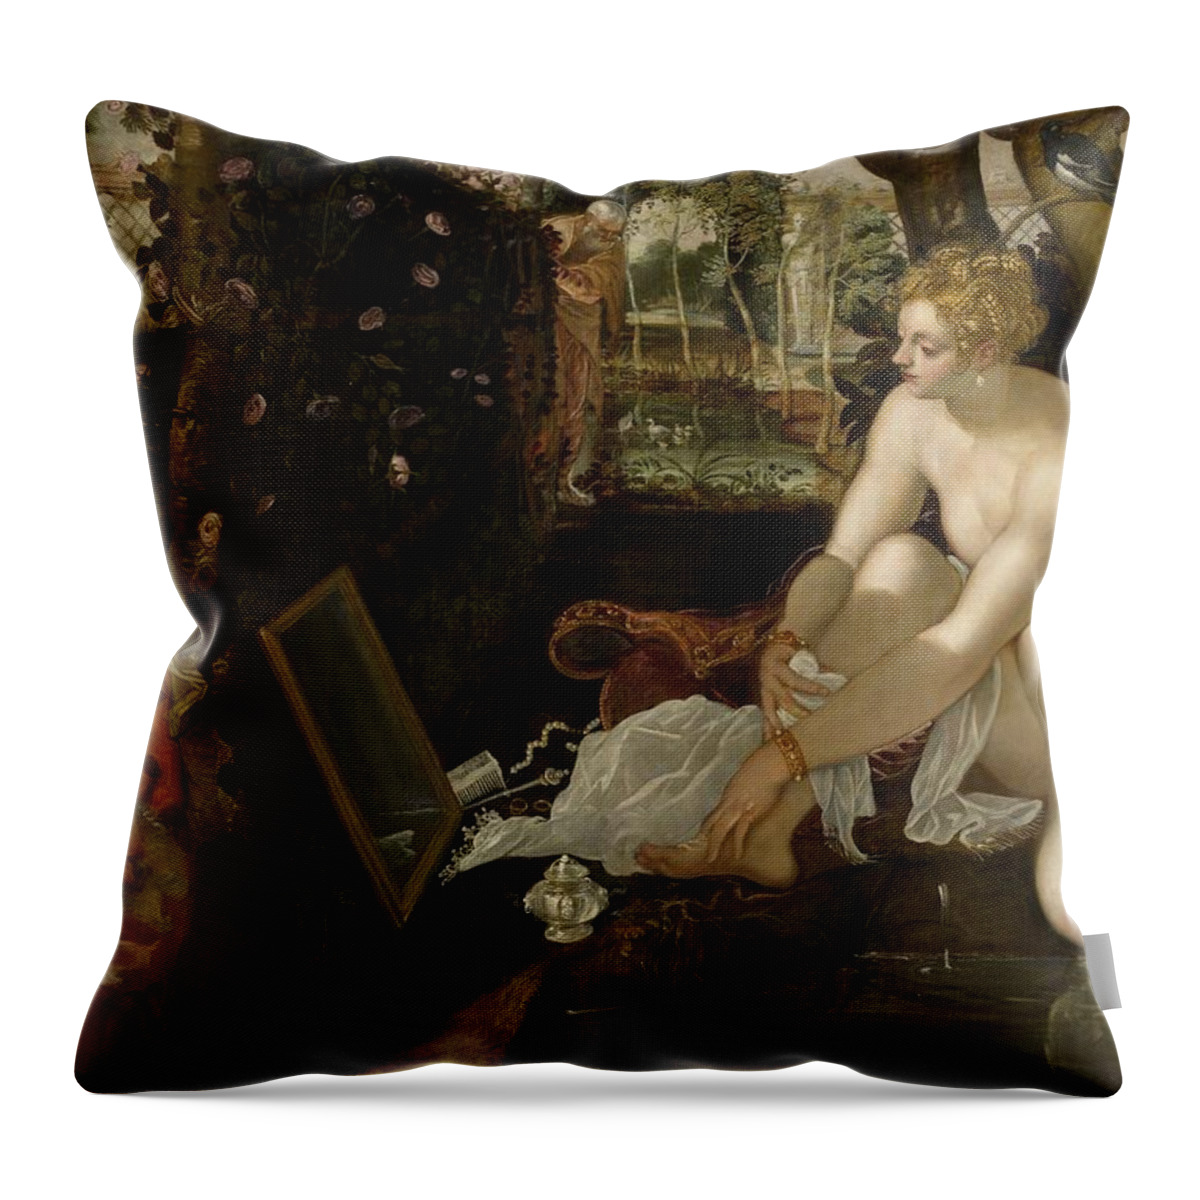 1555-1556 Throw Pillow featuring the painting Susanna and the Elders by Tintoretto